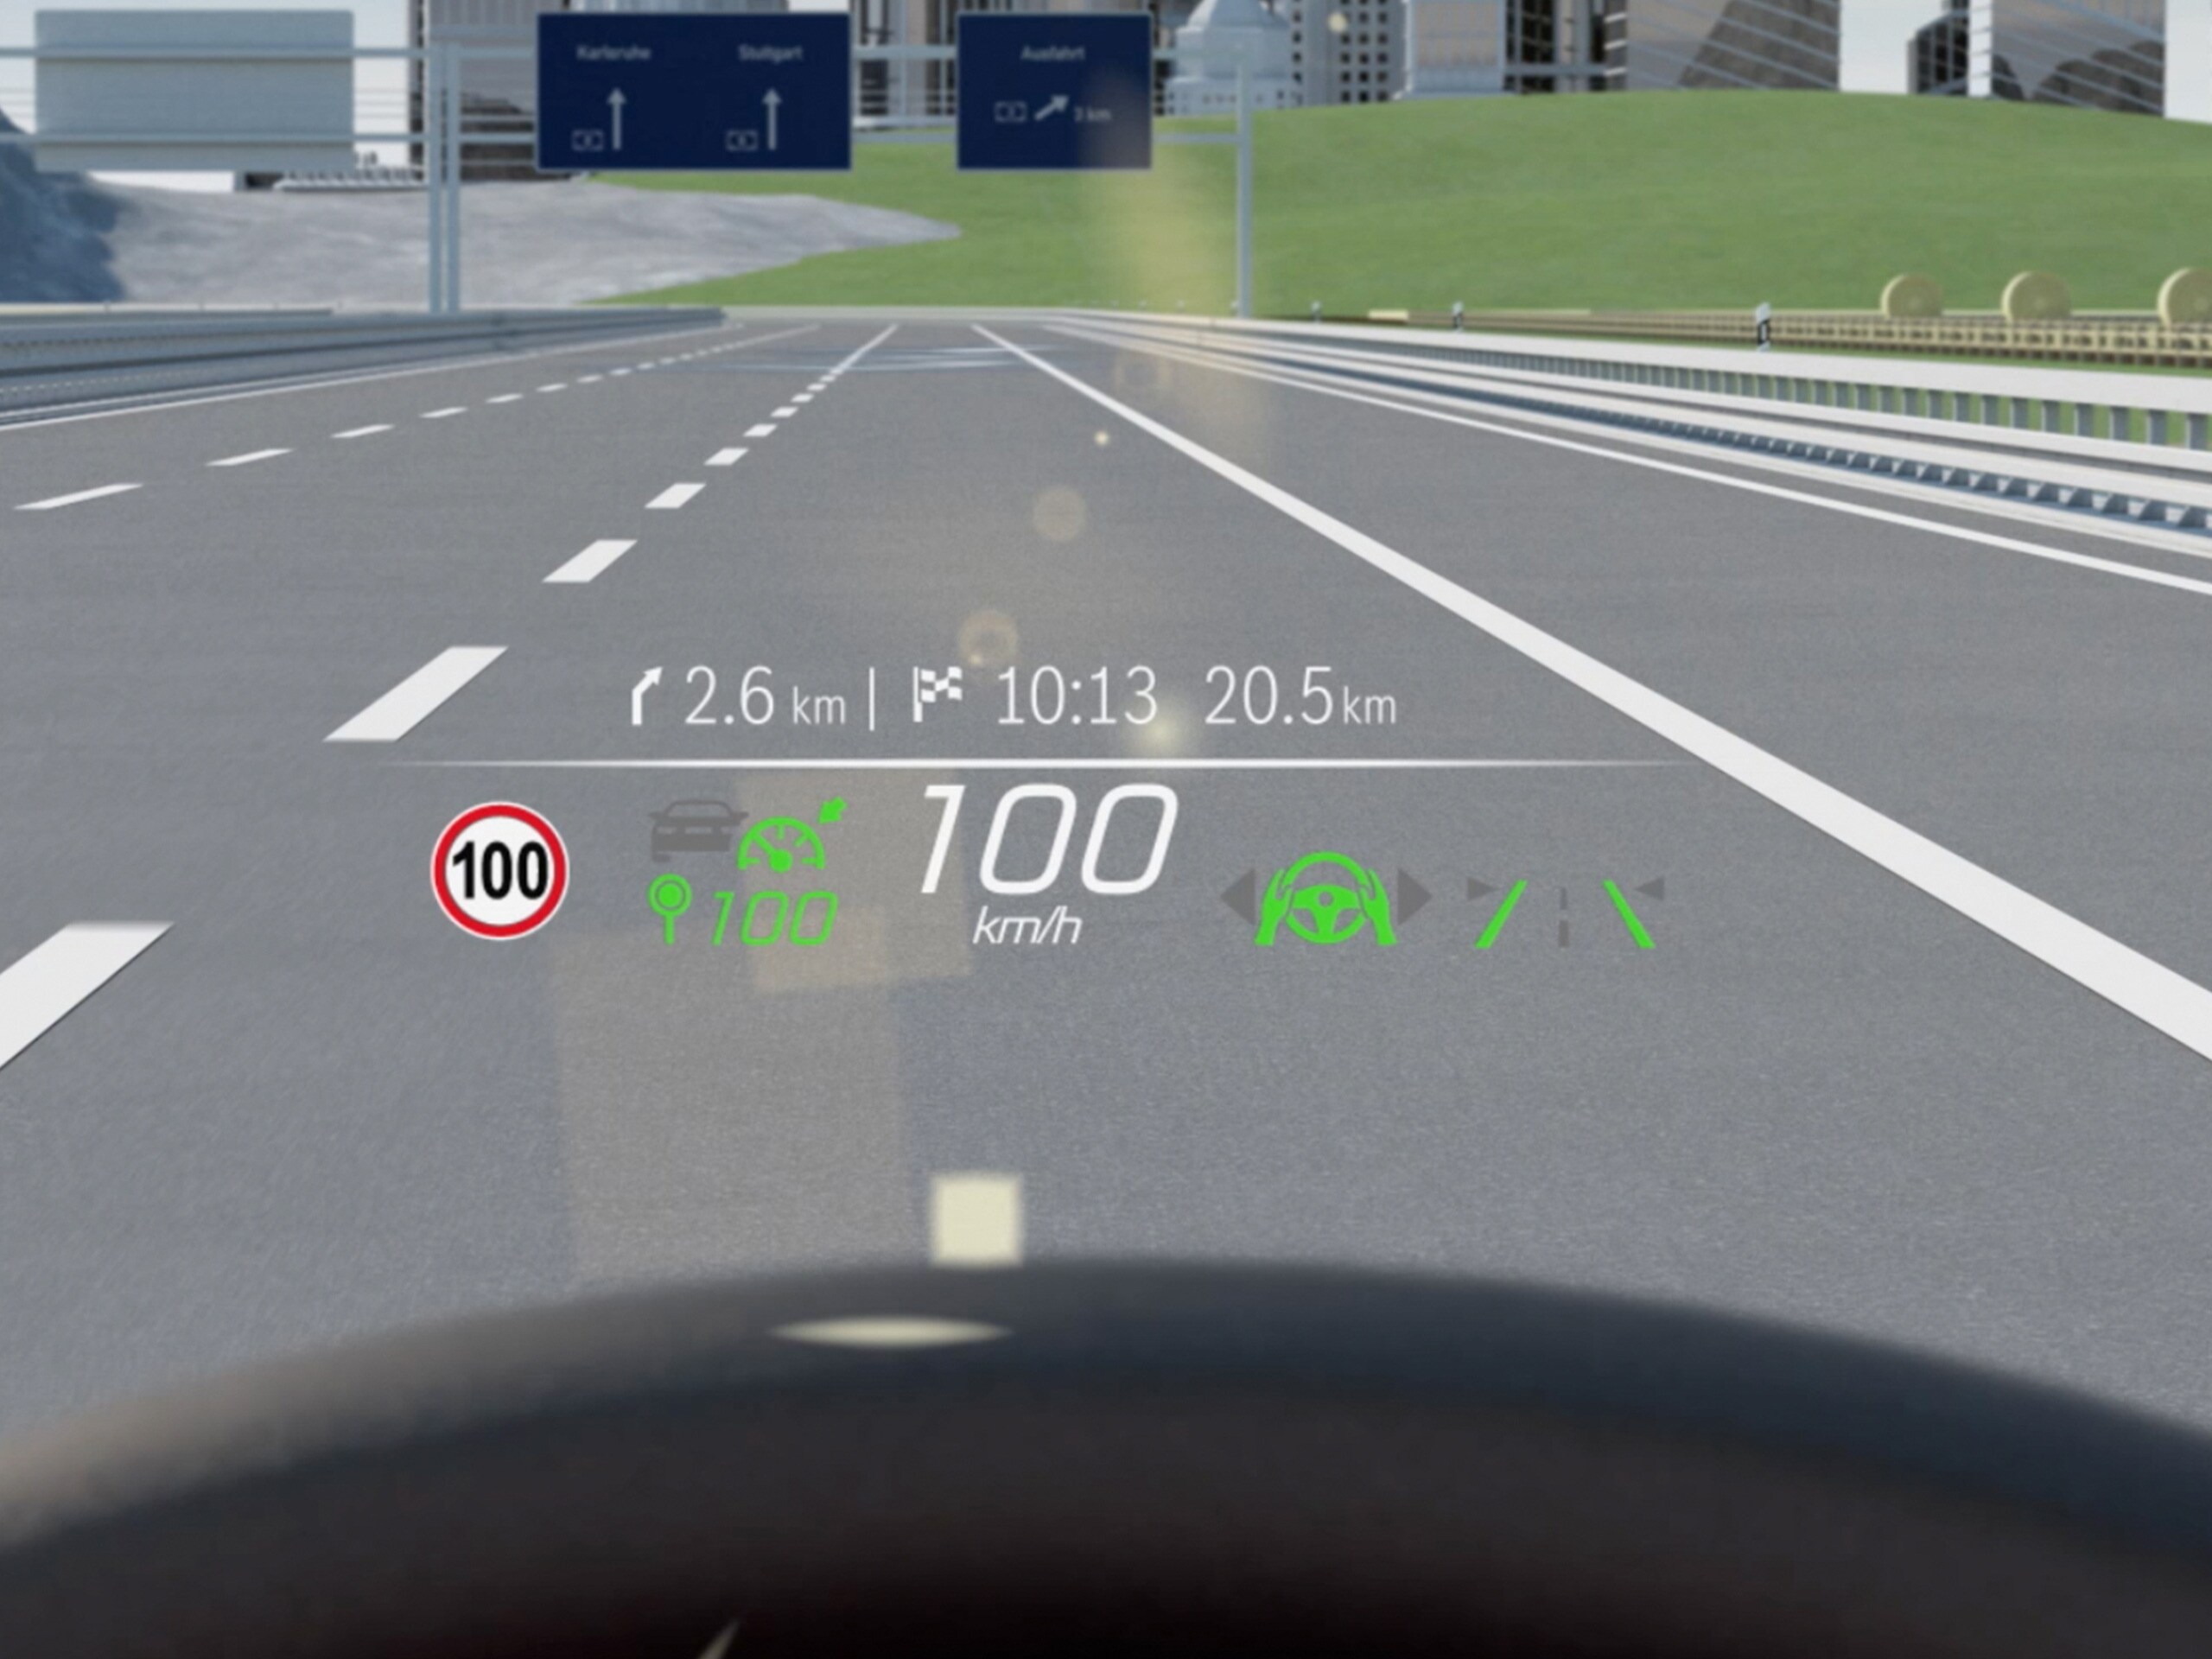 The video shows the head-up display.